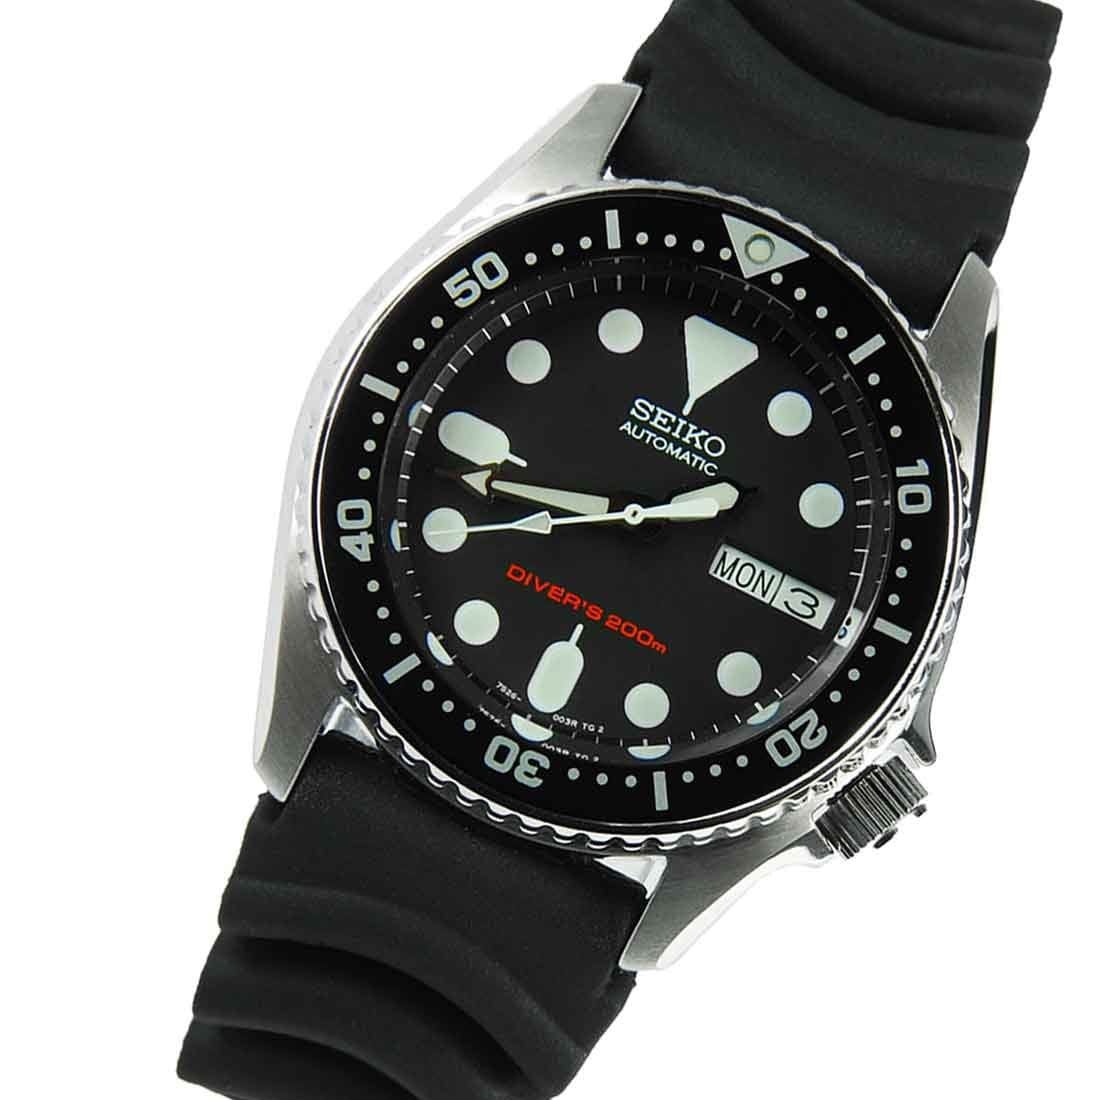 Seiko Automatic Diving Watch SKX013 SKX013K1 with Extra Strap